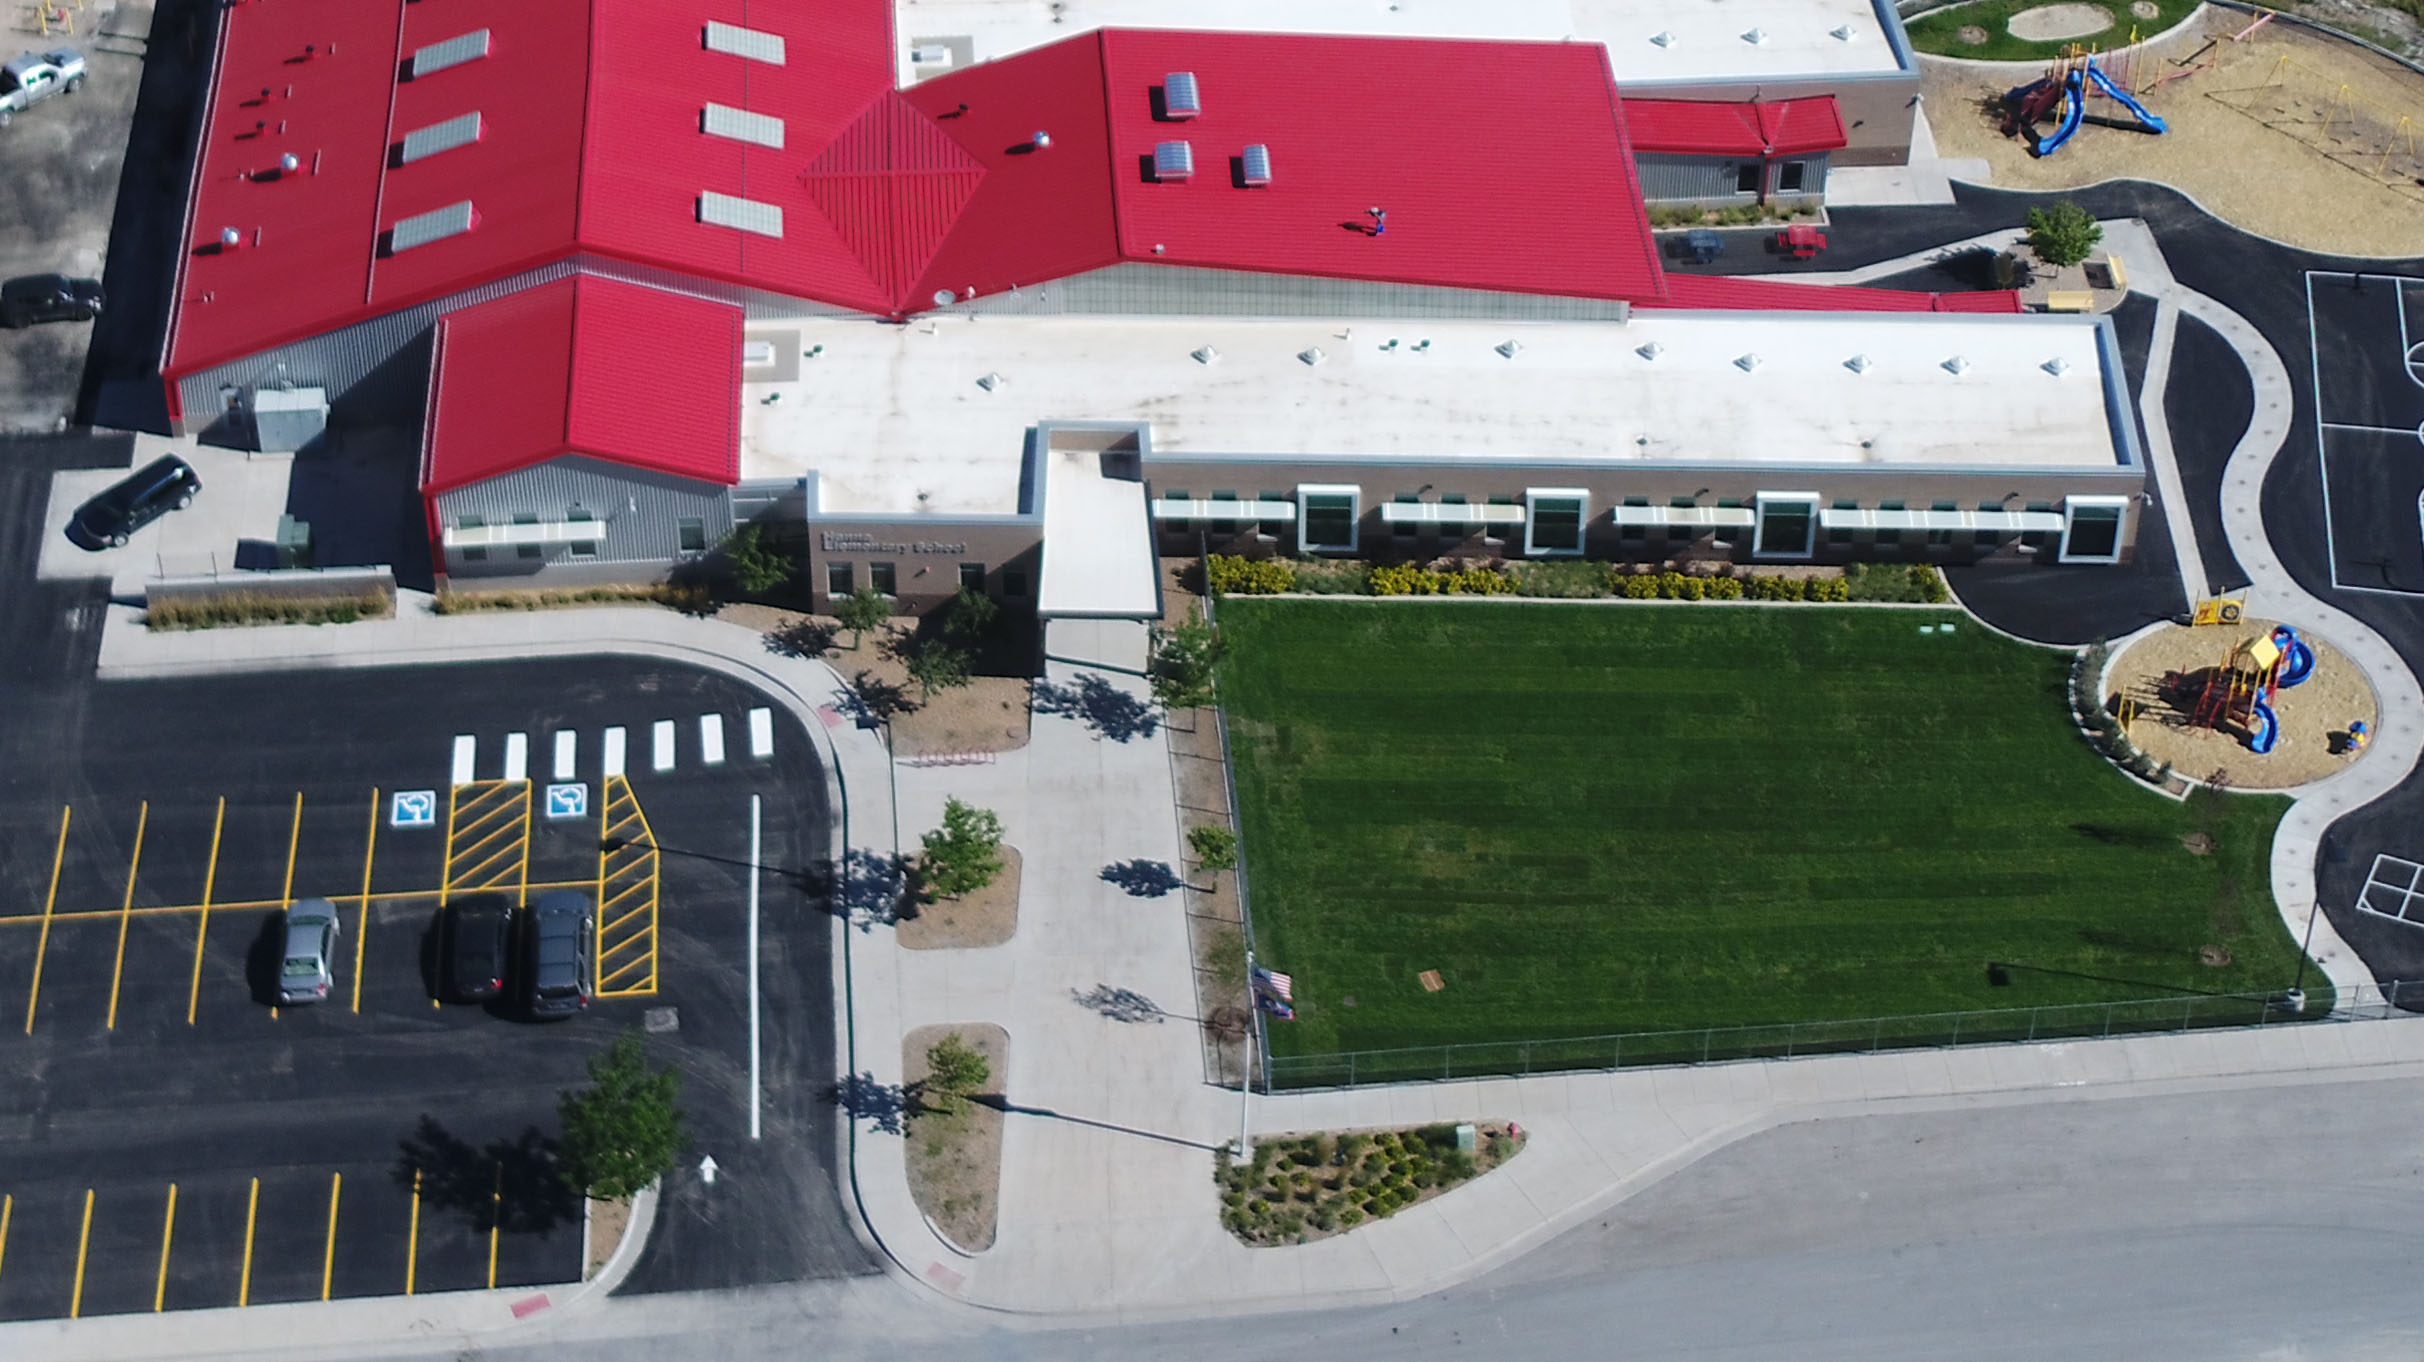 Aerial view of elementary school and surrounding grounds.